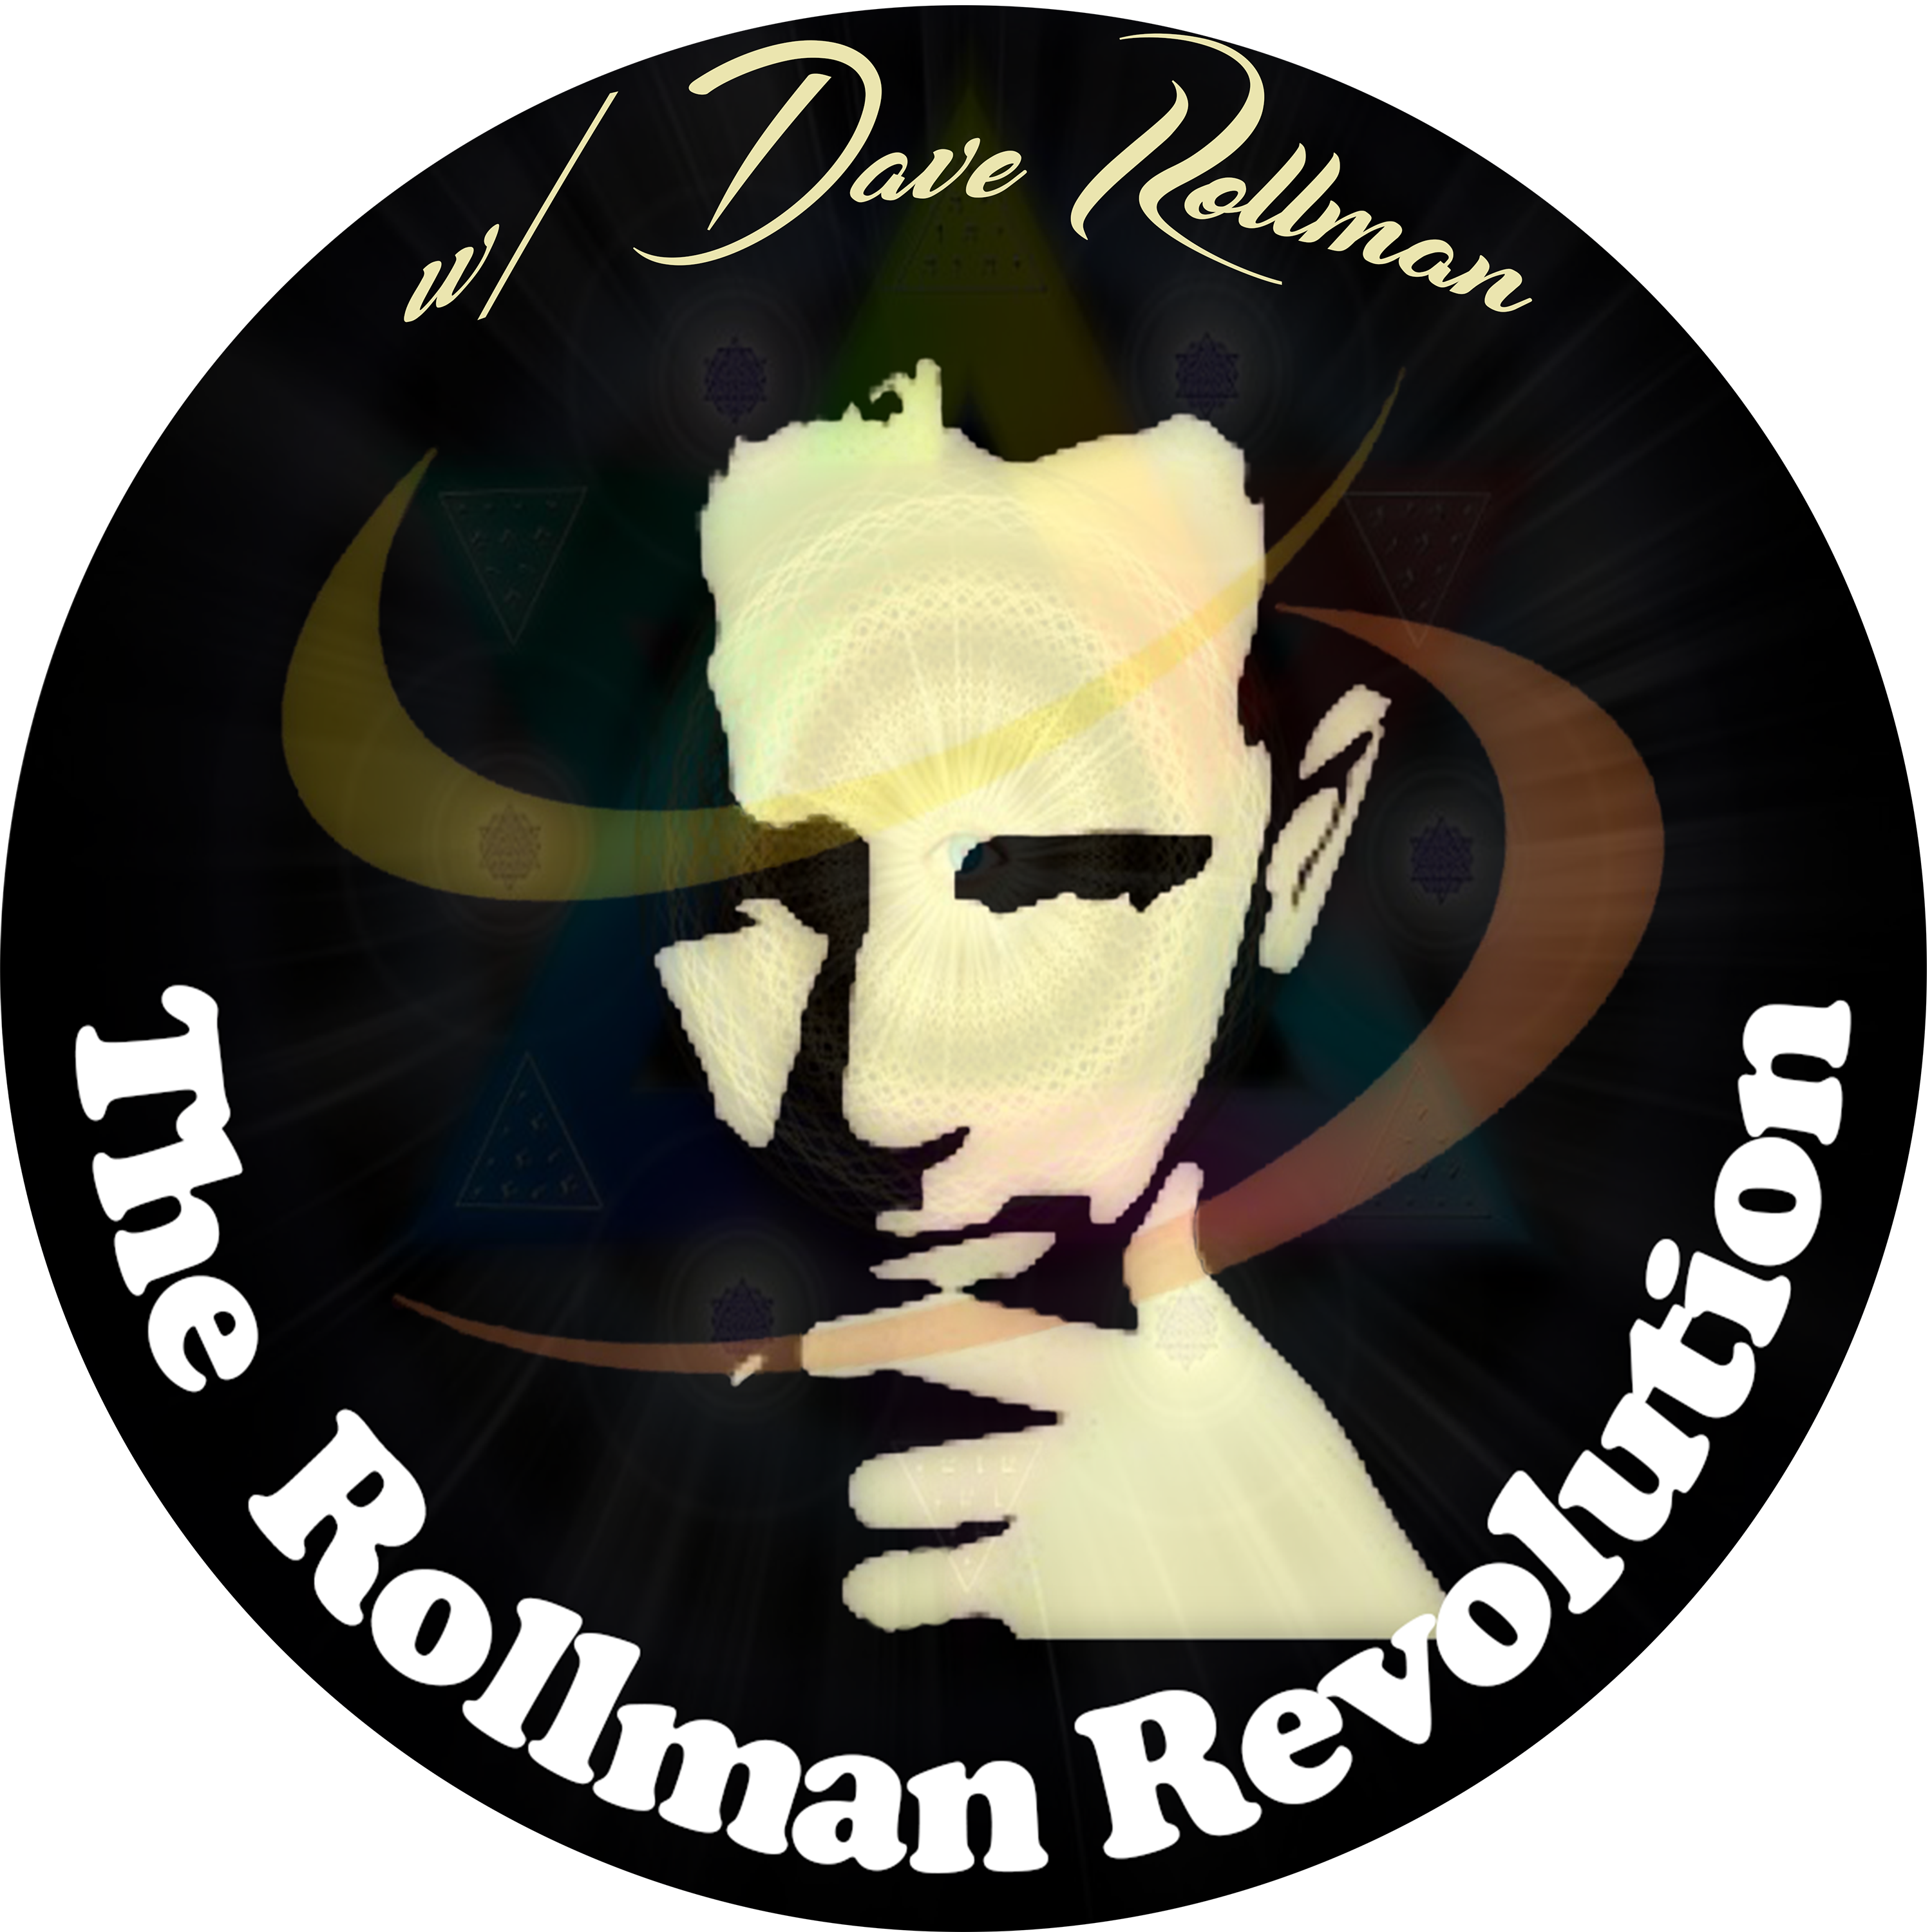 The Rollman Revolution - An Educational and Inspirational Philosophy Podcast